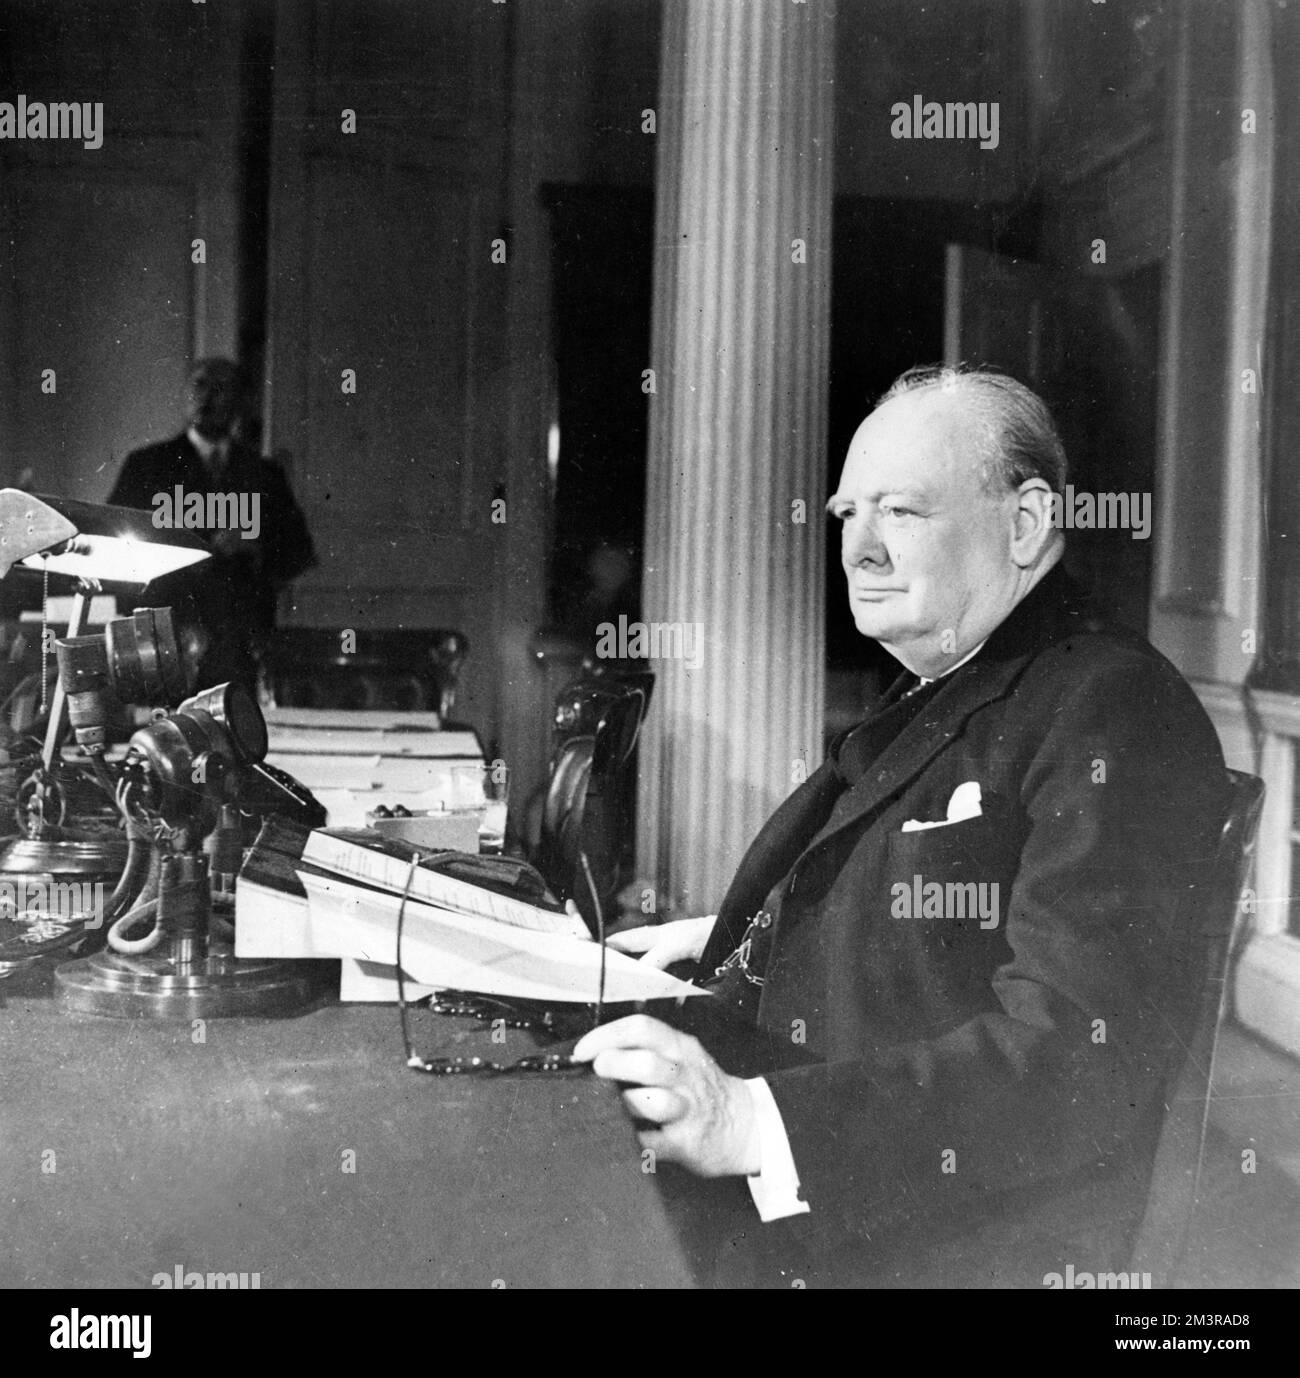 Winston Churchill VE Day Broadcast 1945.  Prime Minister Winston Churchill pictured making his broadcast to the nation at 3pm 8th May 1945.      Date: 1945 Stock Photo